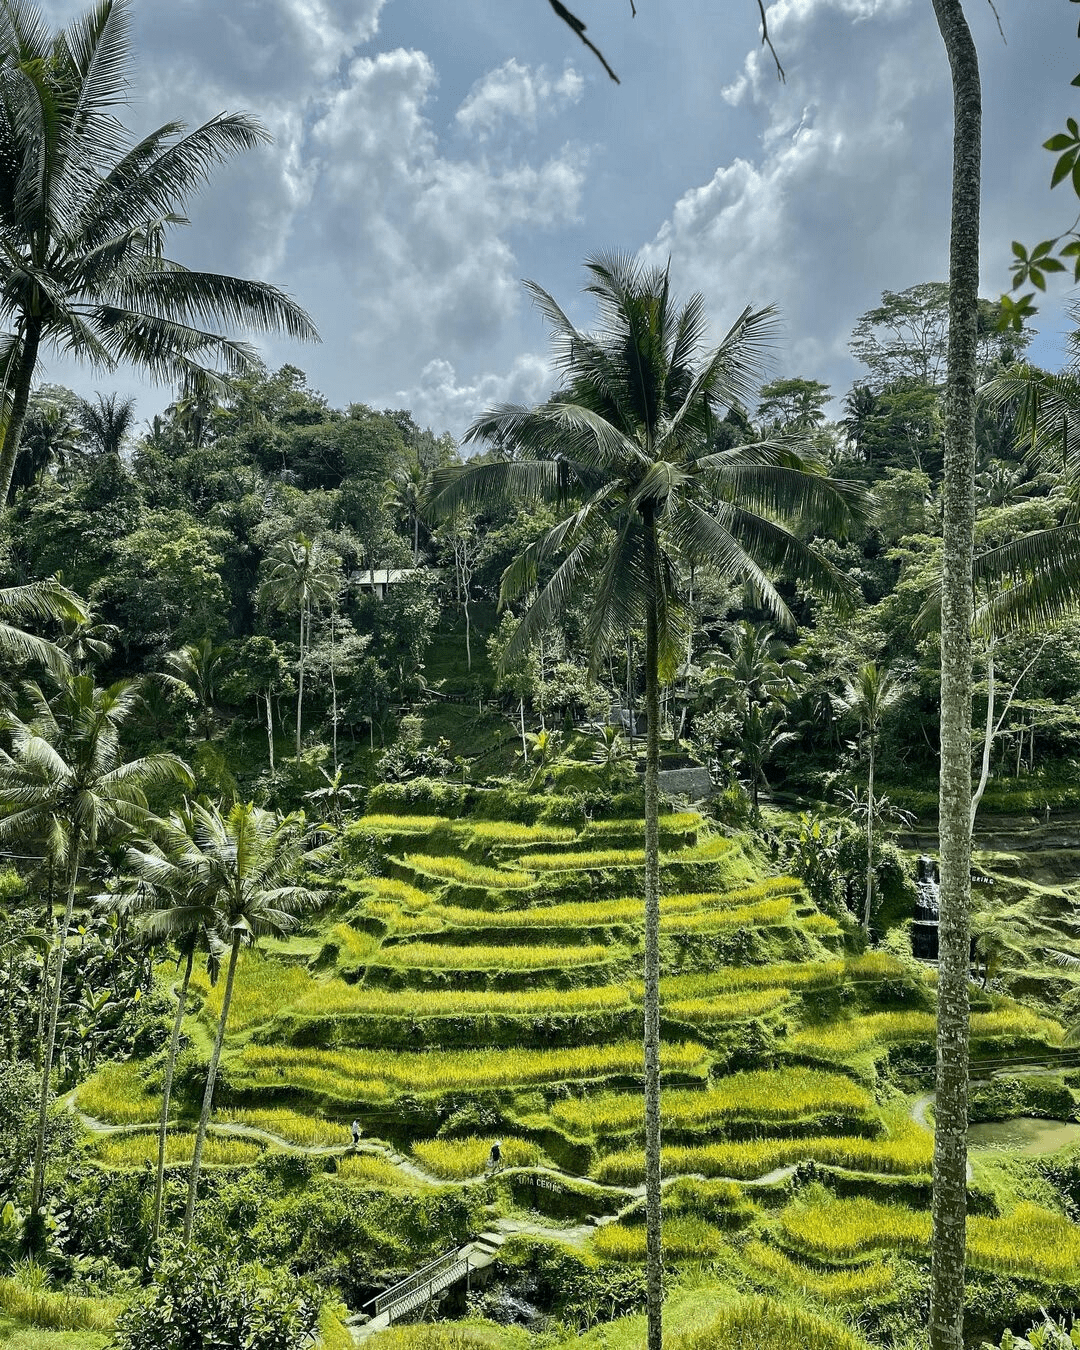 best temples in bali - gunung kawi temple rice paddy